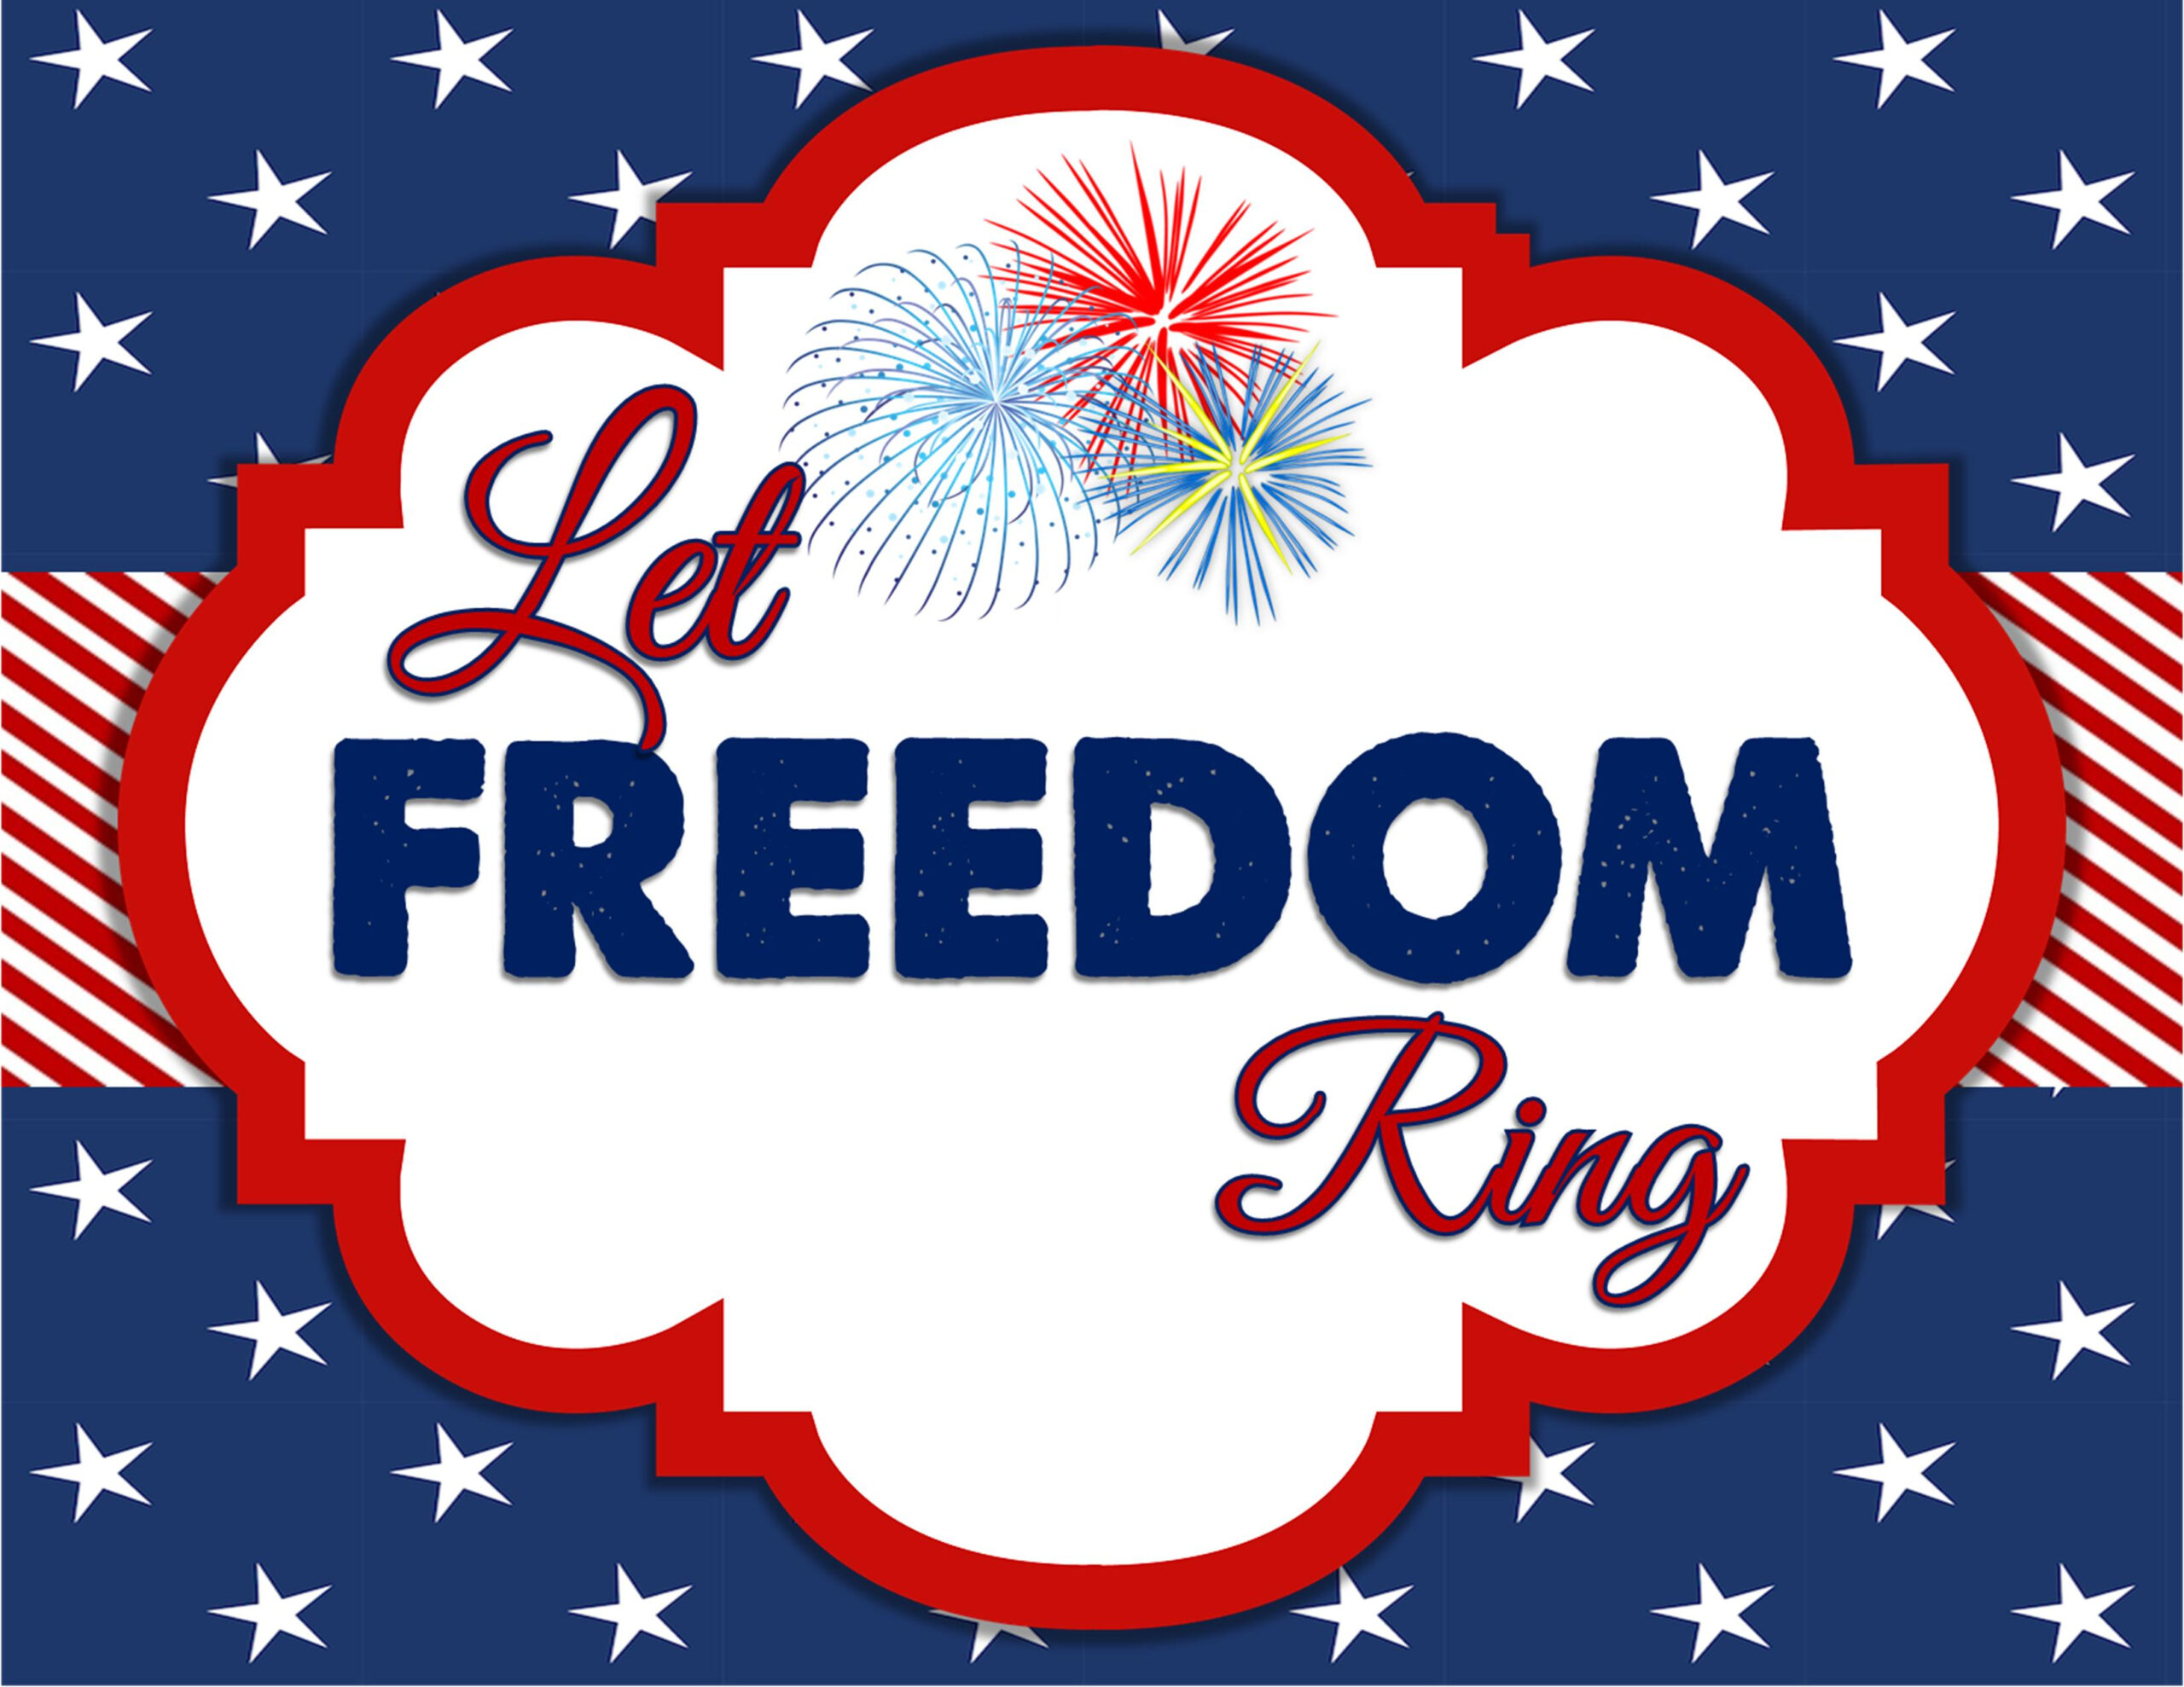 FREE 4th Of July Party Printables By Designs By Serendipity Catch My 